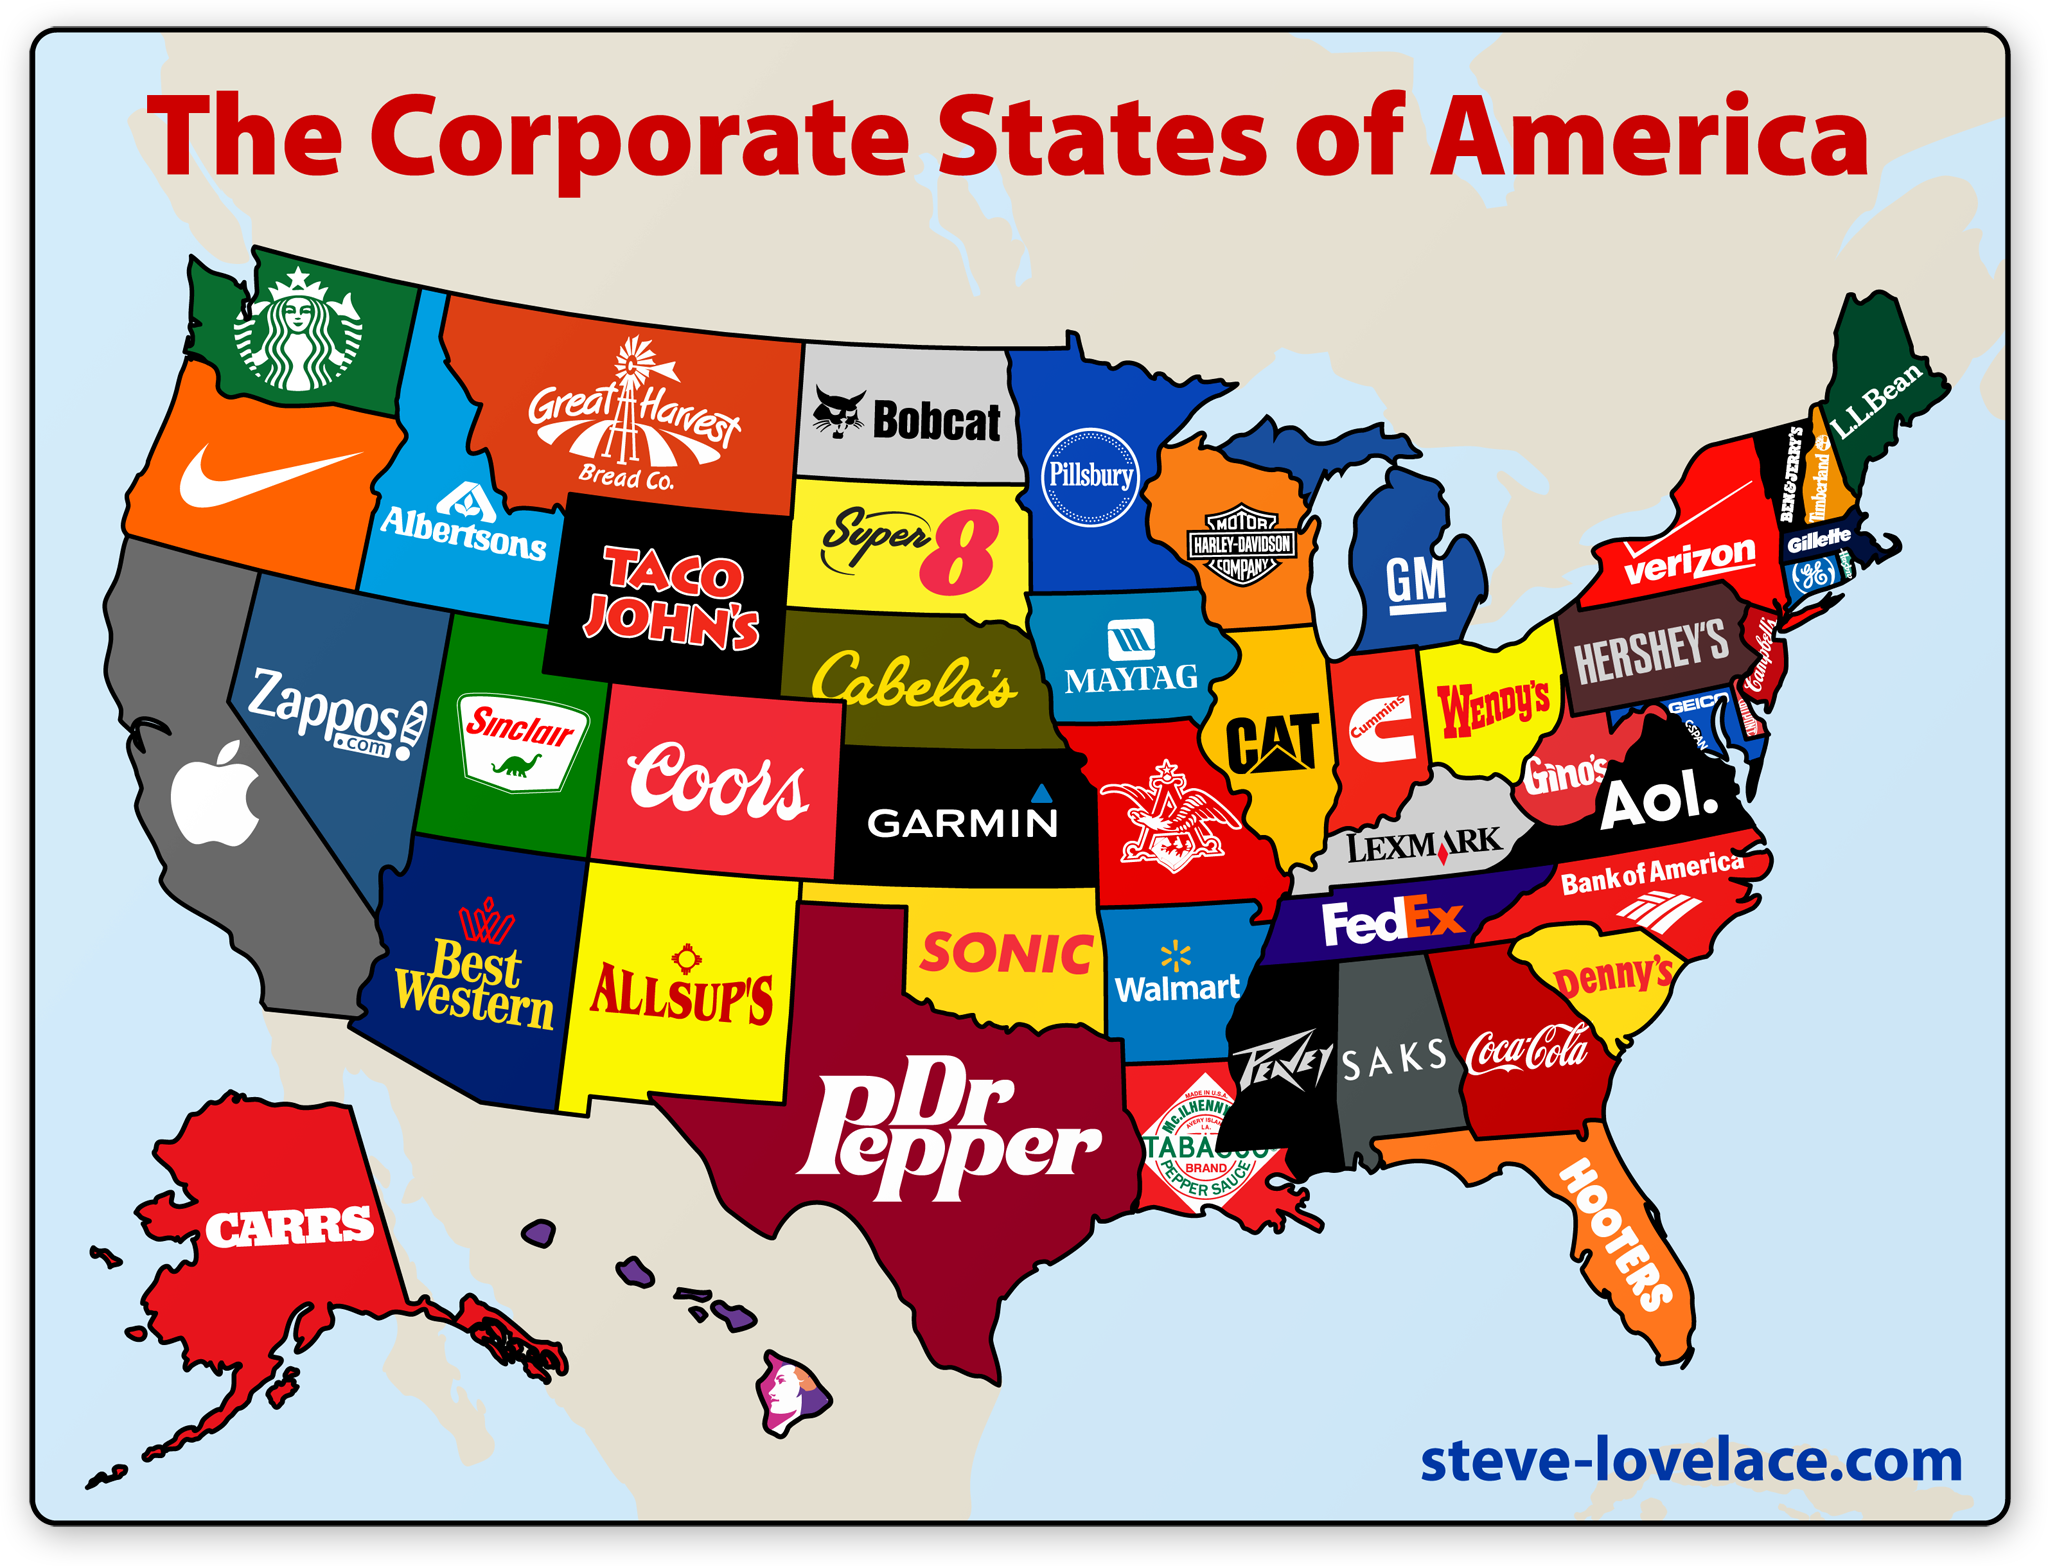 The most popular brand in each state